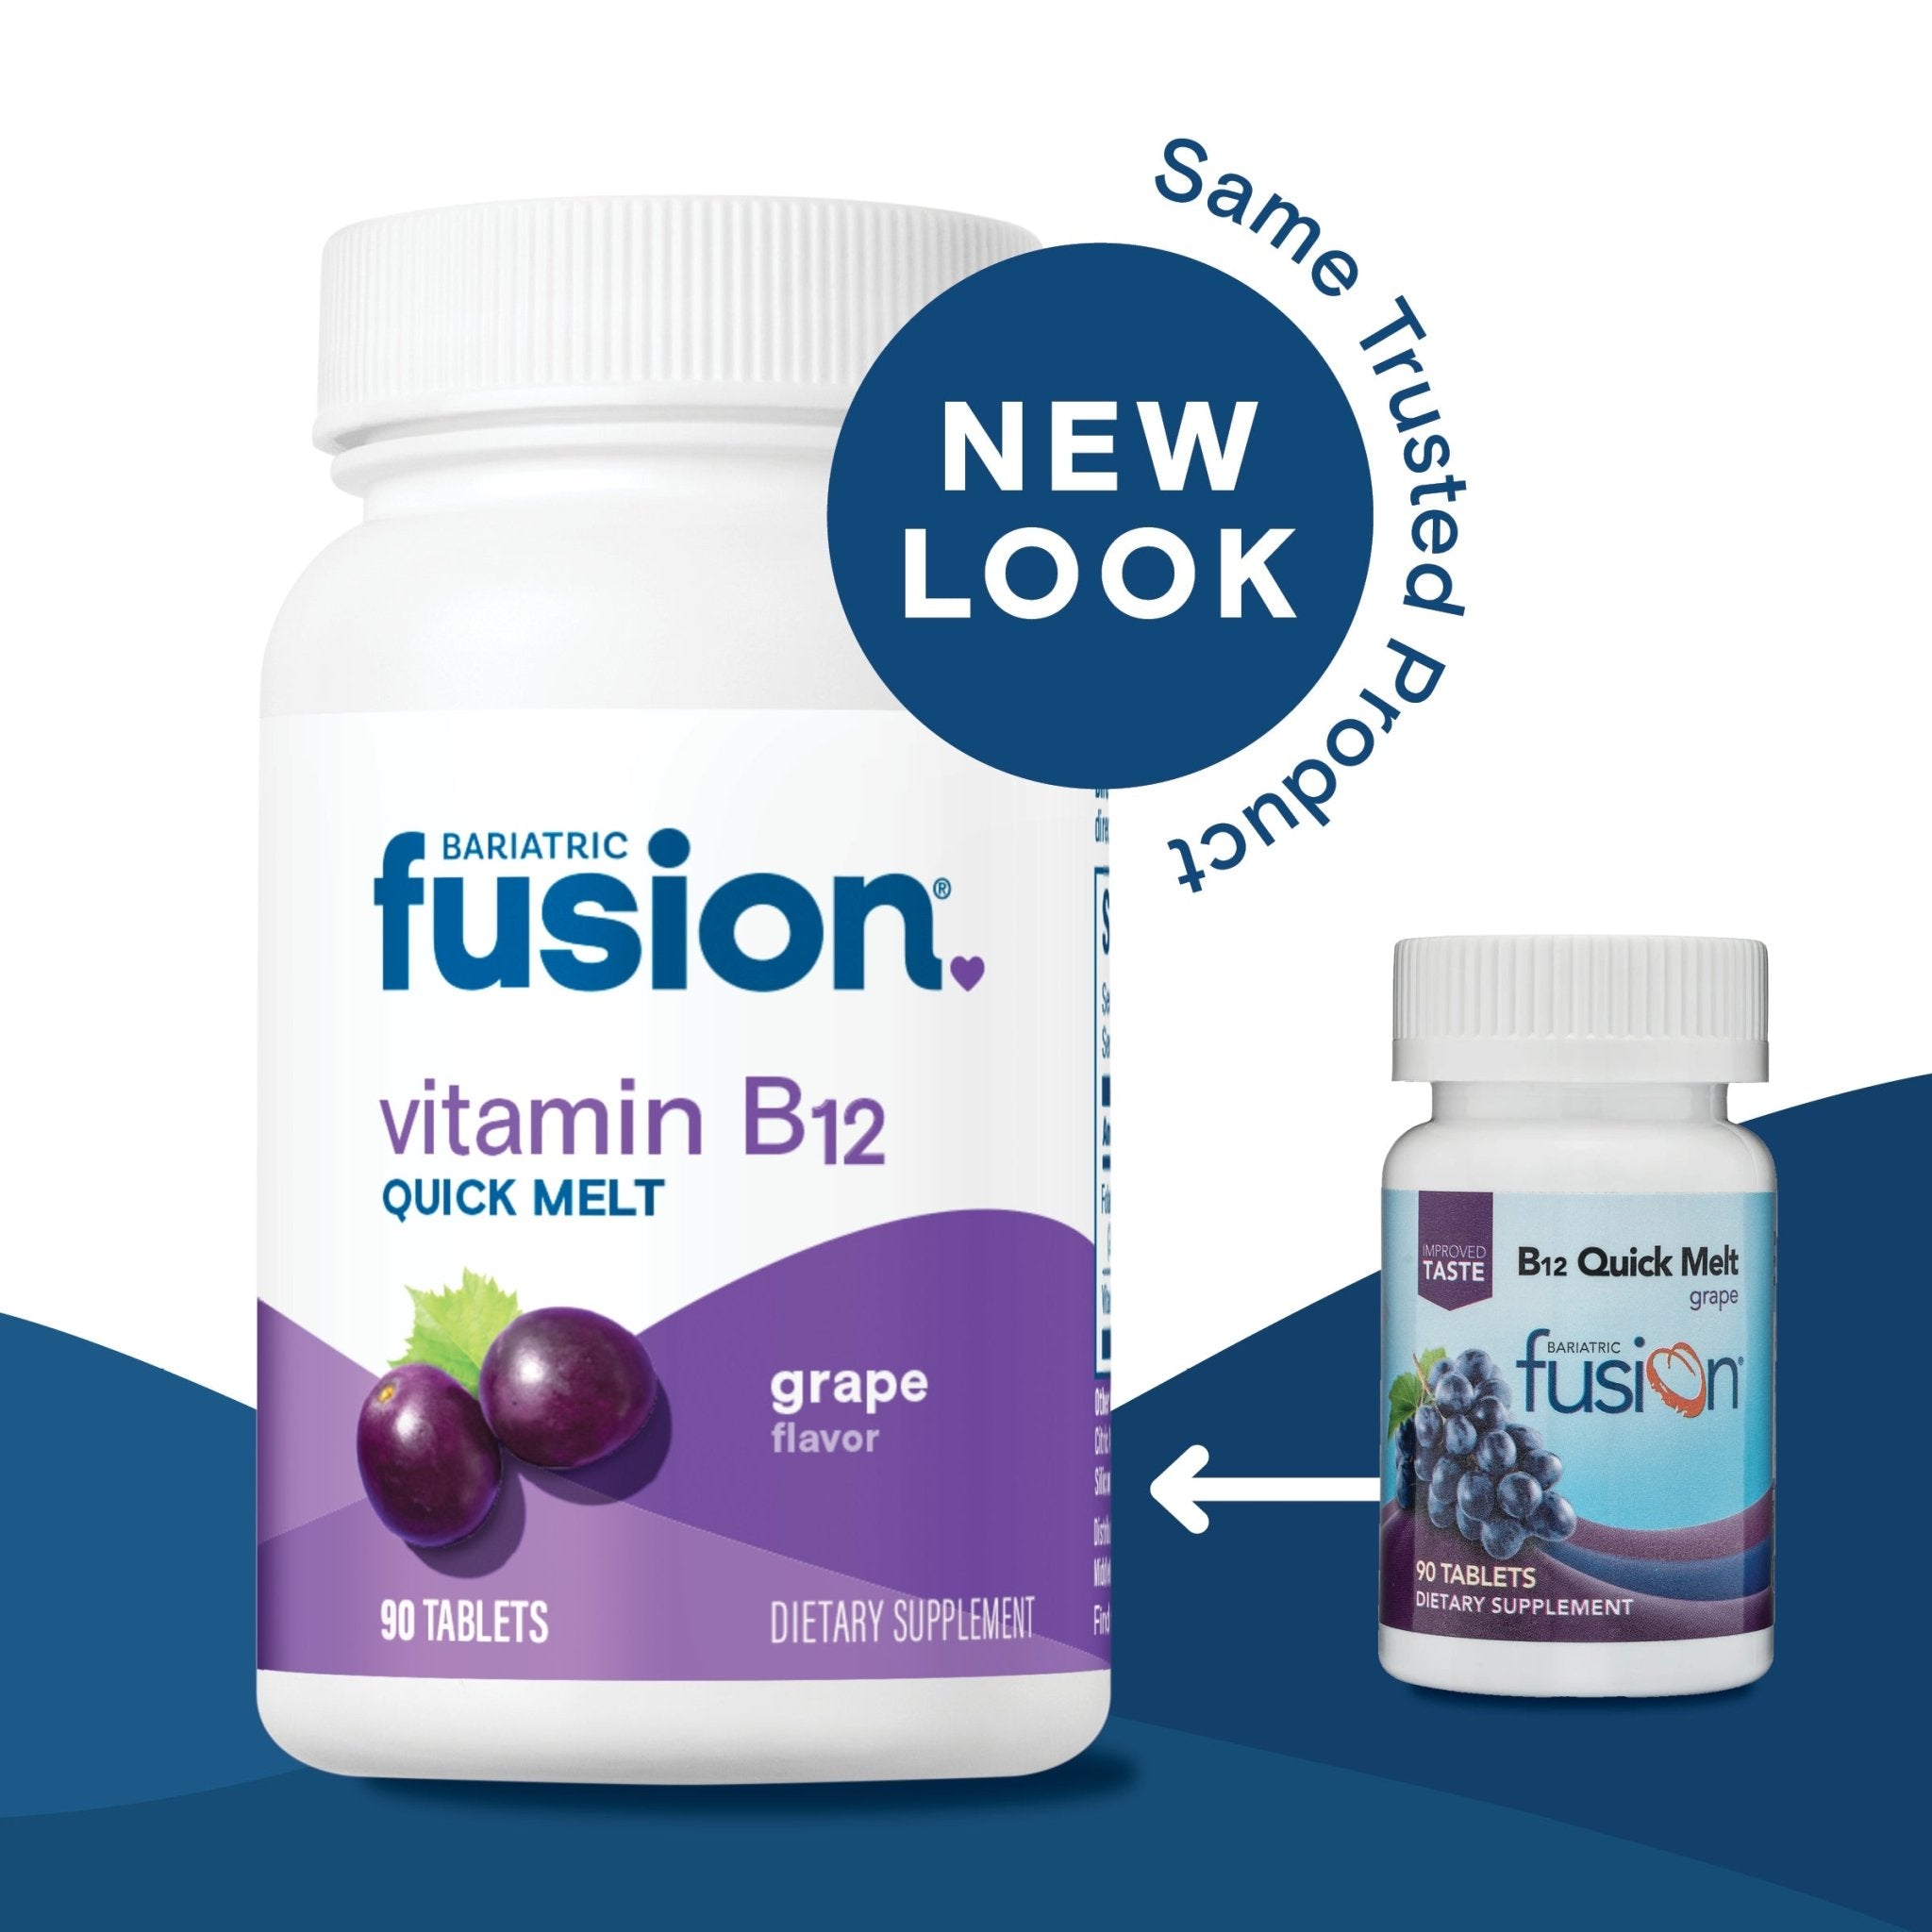 Bariatric Fusion Grape Vitamin B12 Quick Melt new look, same trusted product.